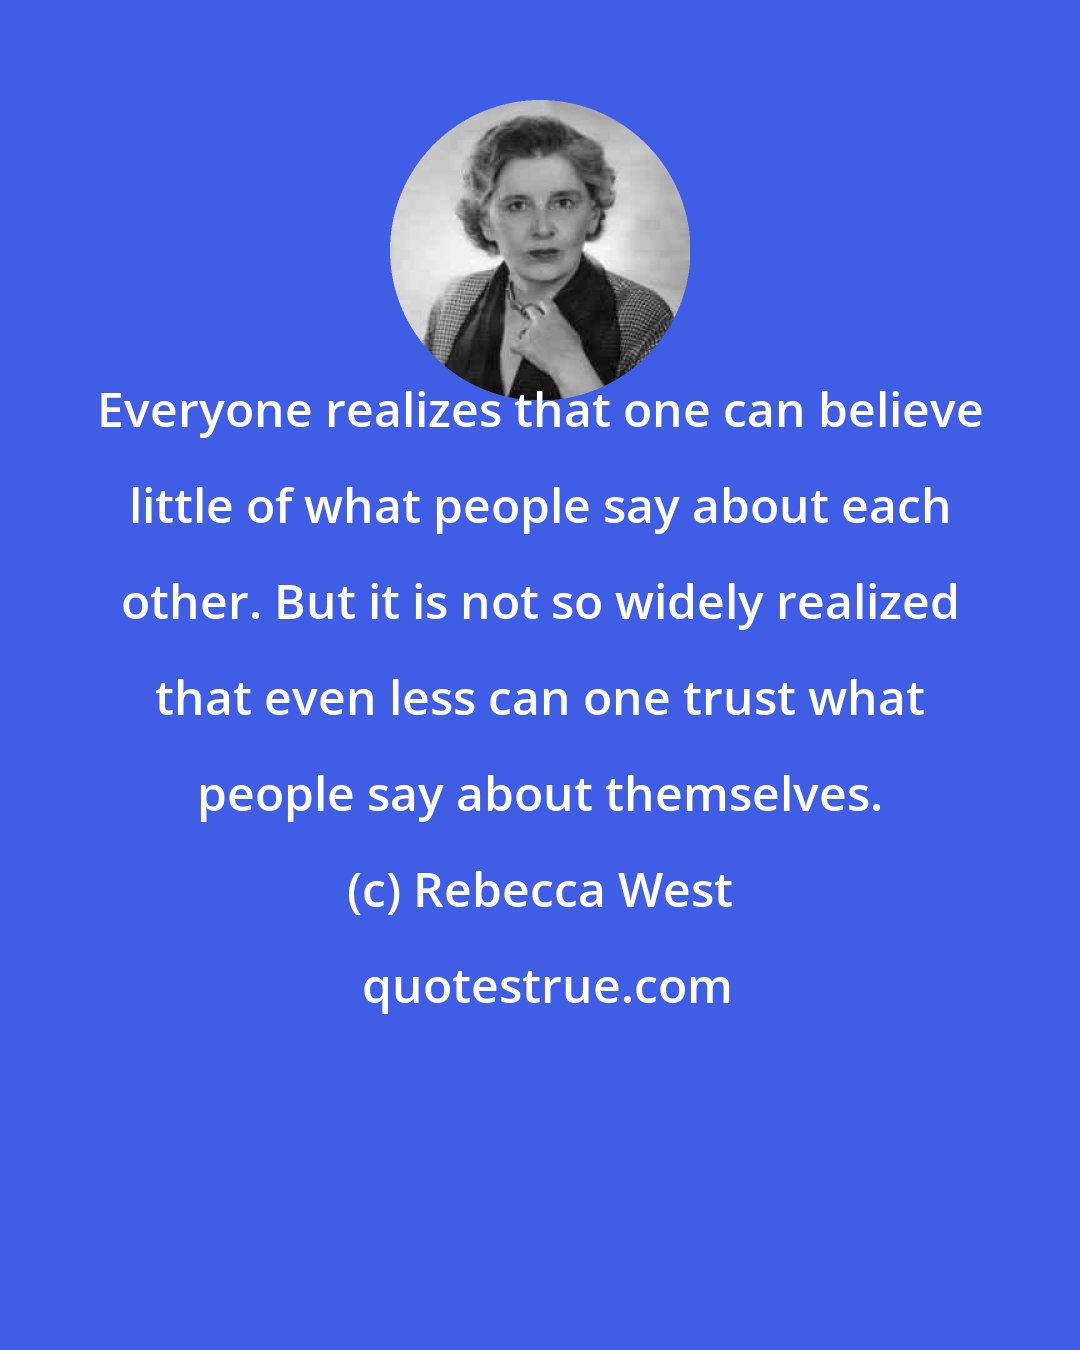 Rebecca West: Everyone realizes that one can believe little of what people say about each other. But it is not so widely realized that even less can one trust what people say about themselves.